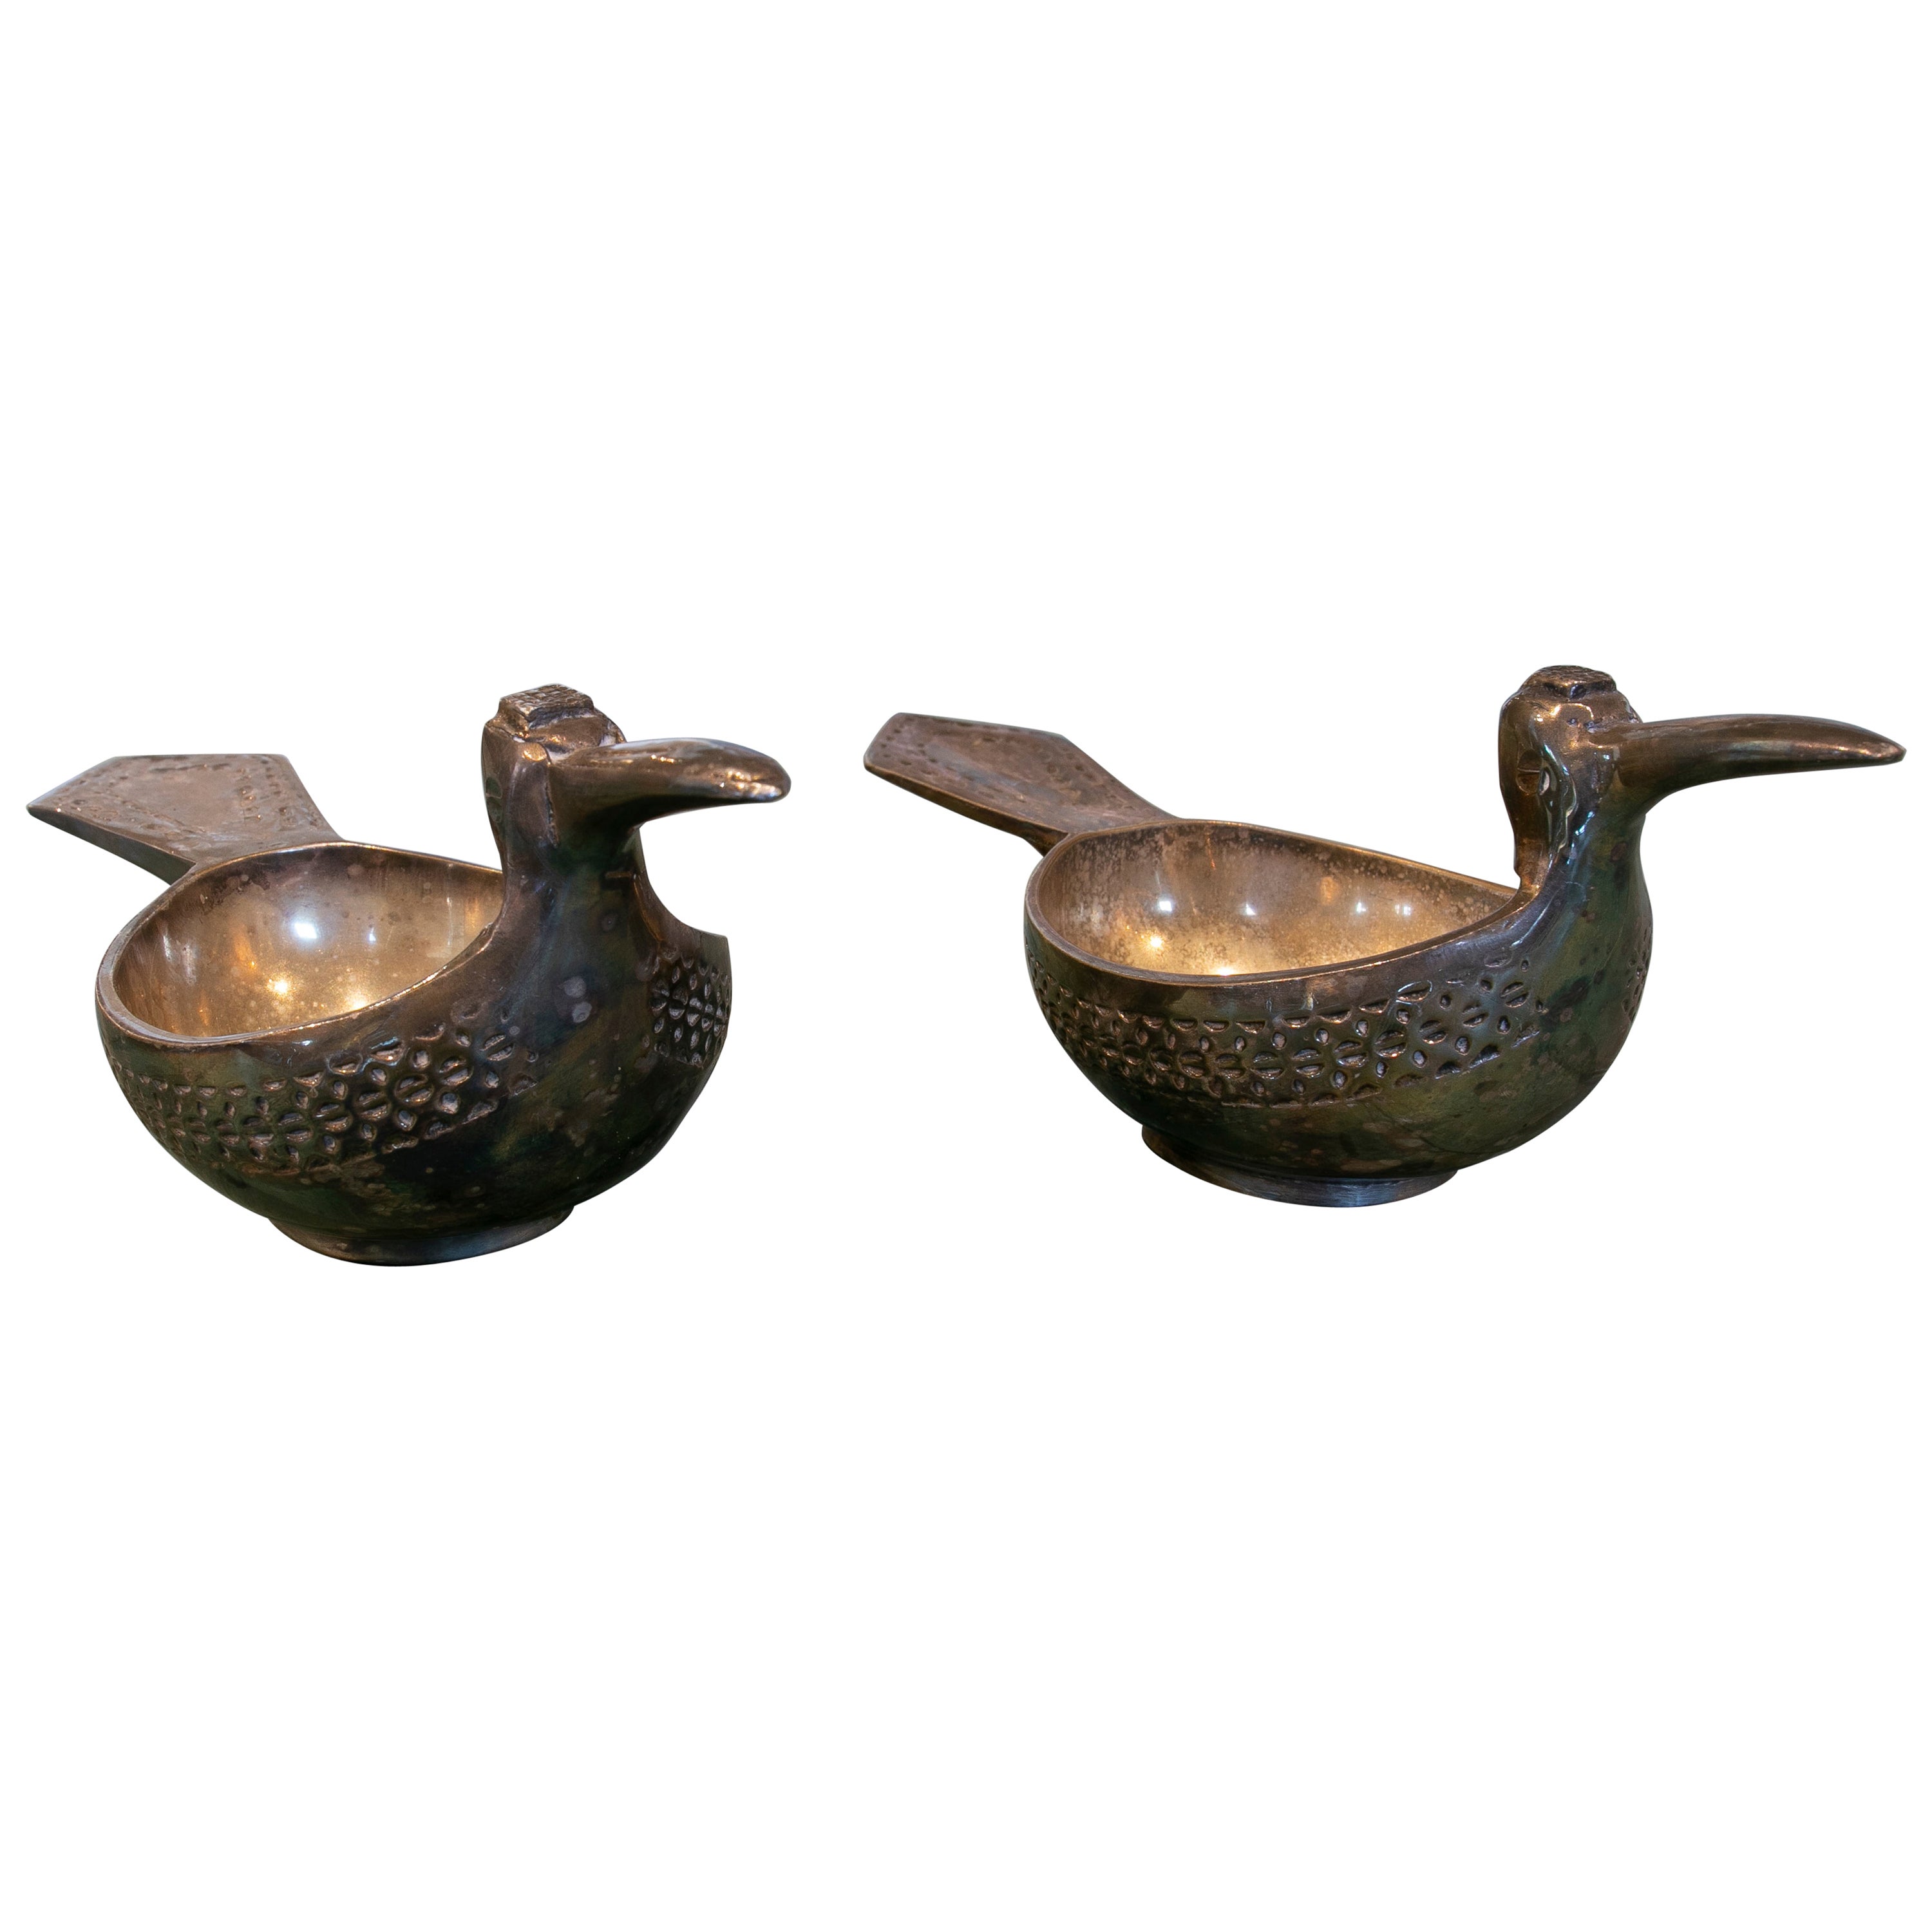 1970s Silver-Plated Metal Bowls in the Shape of Birds